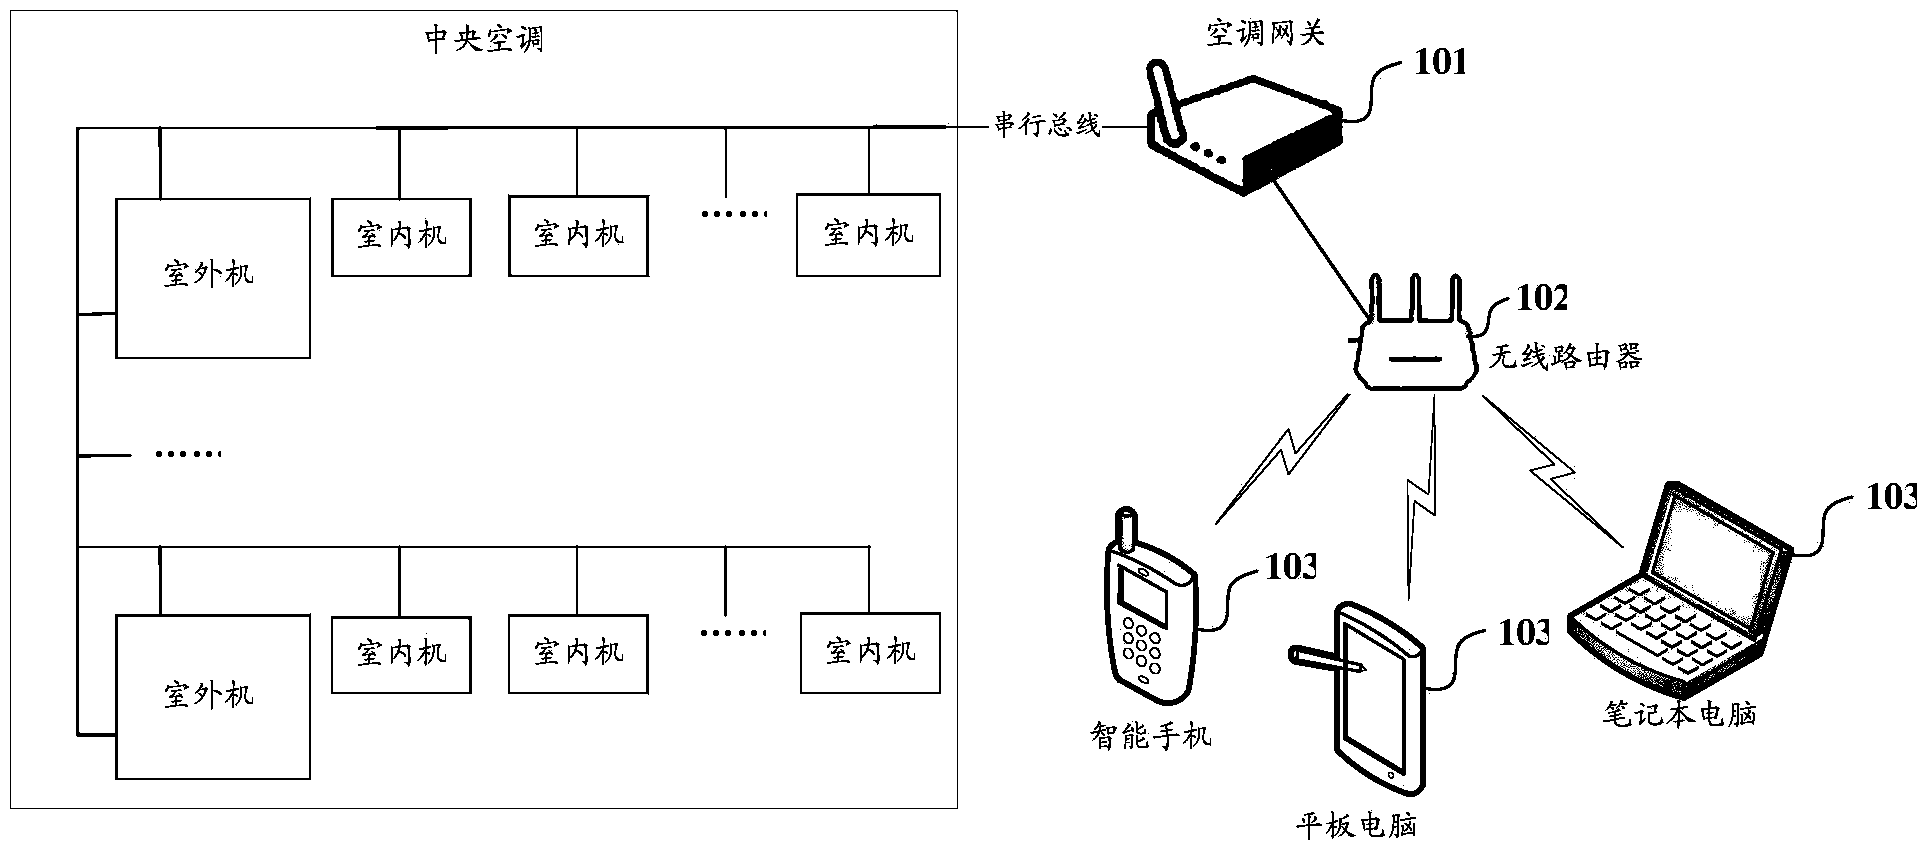 Central air conditioning control system and control method compatible with local area network and wide area network